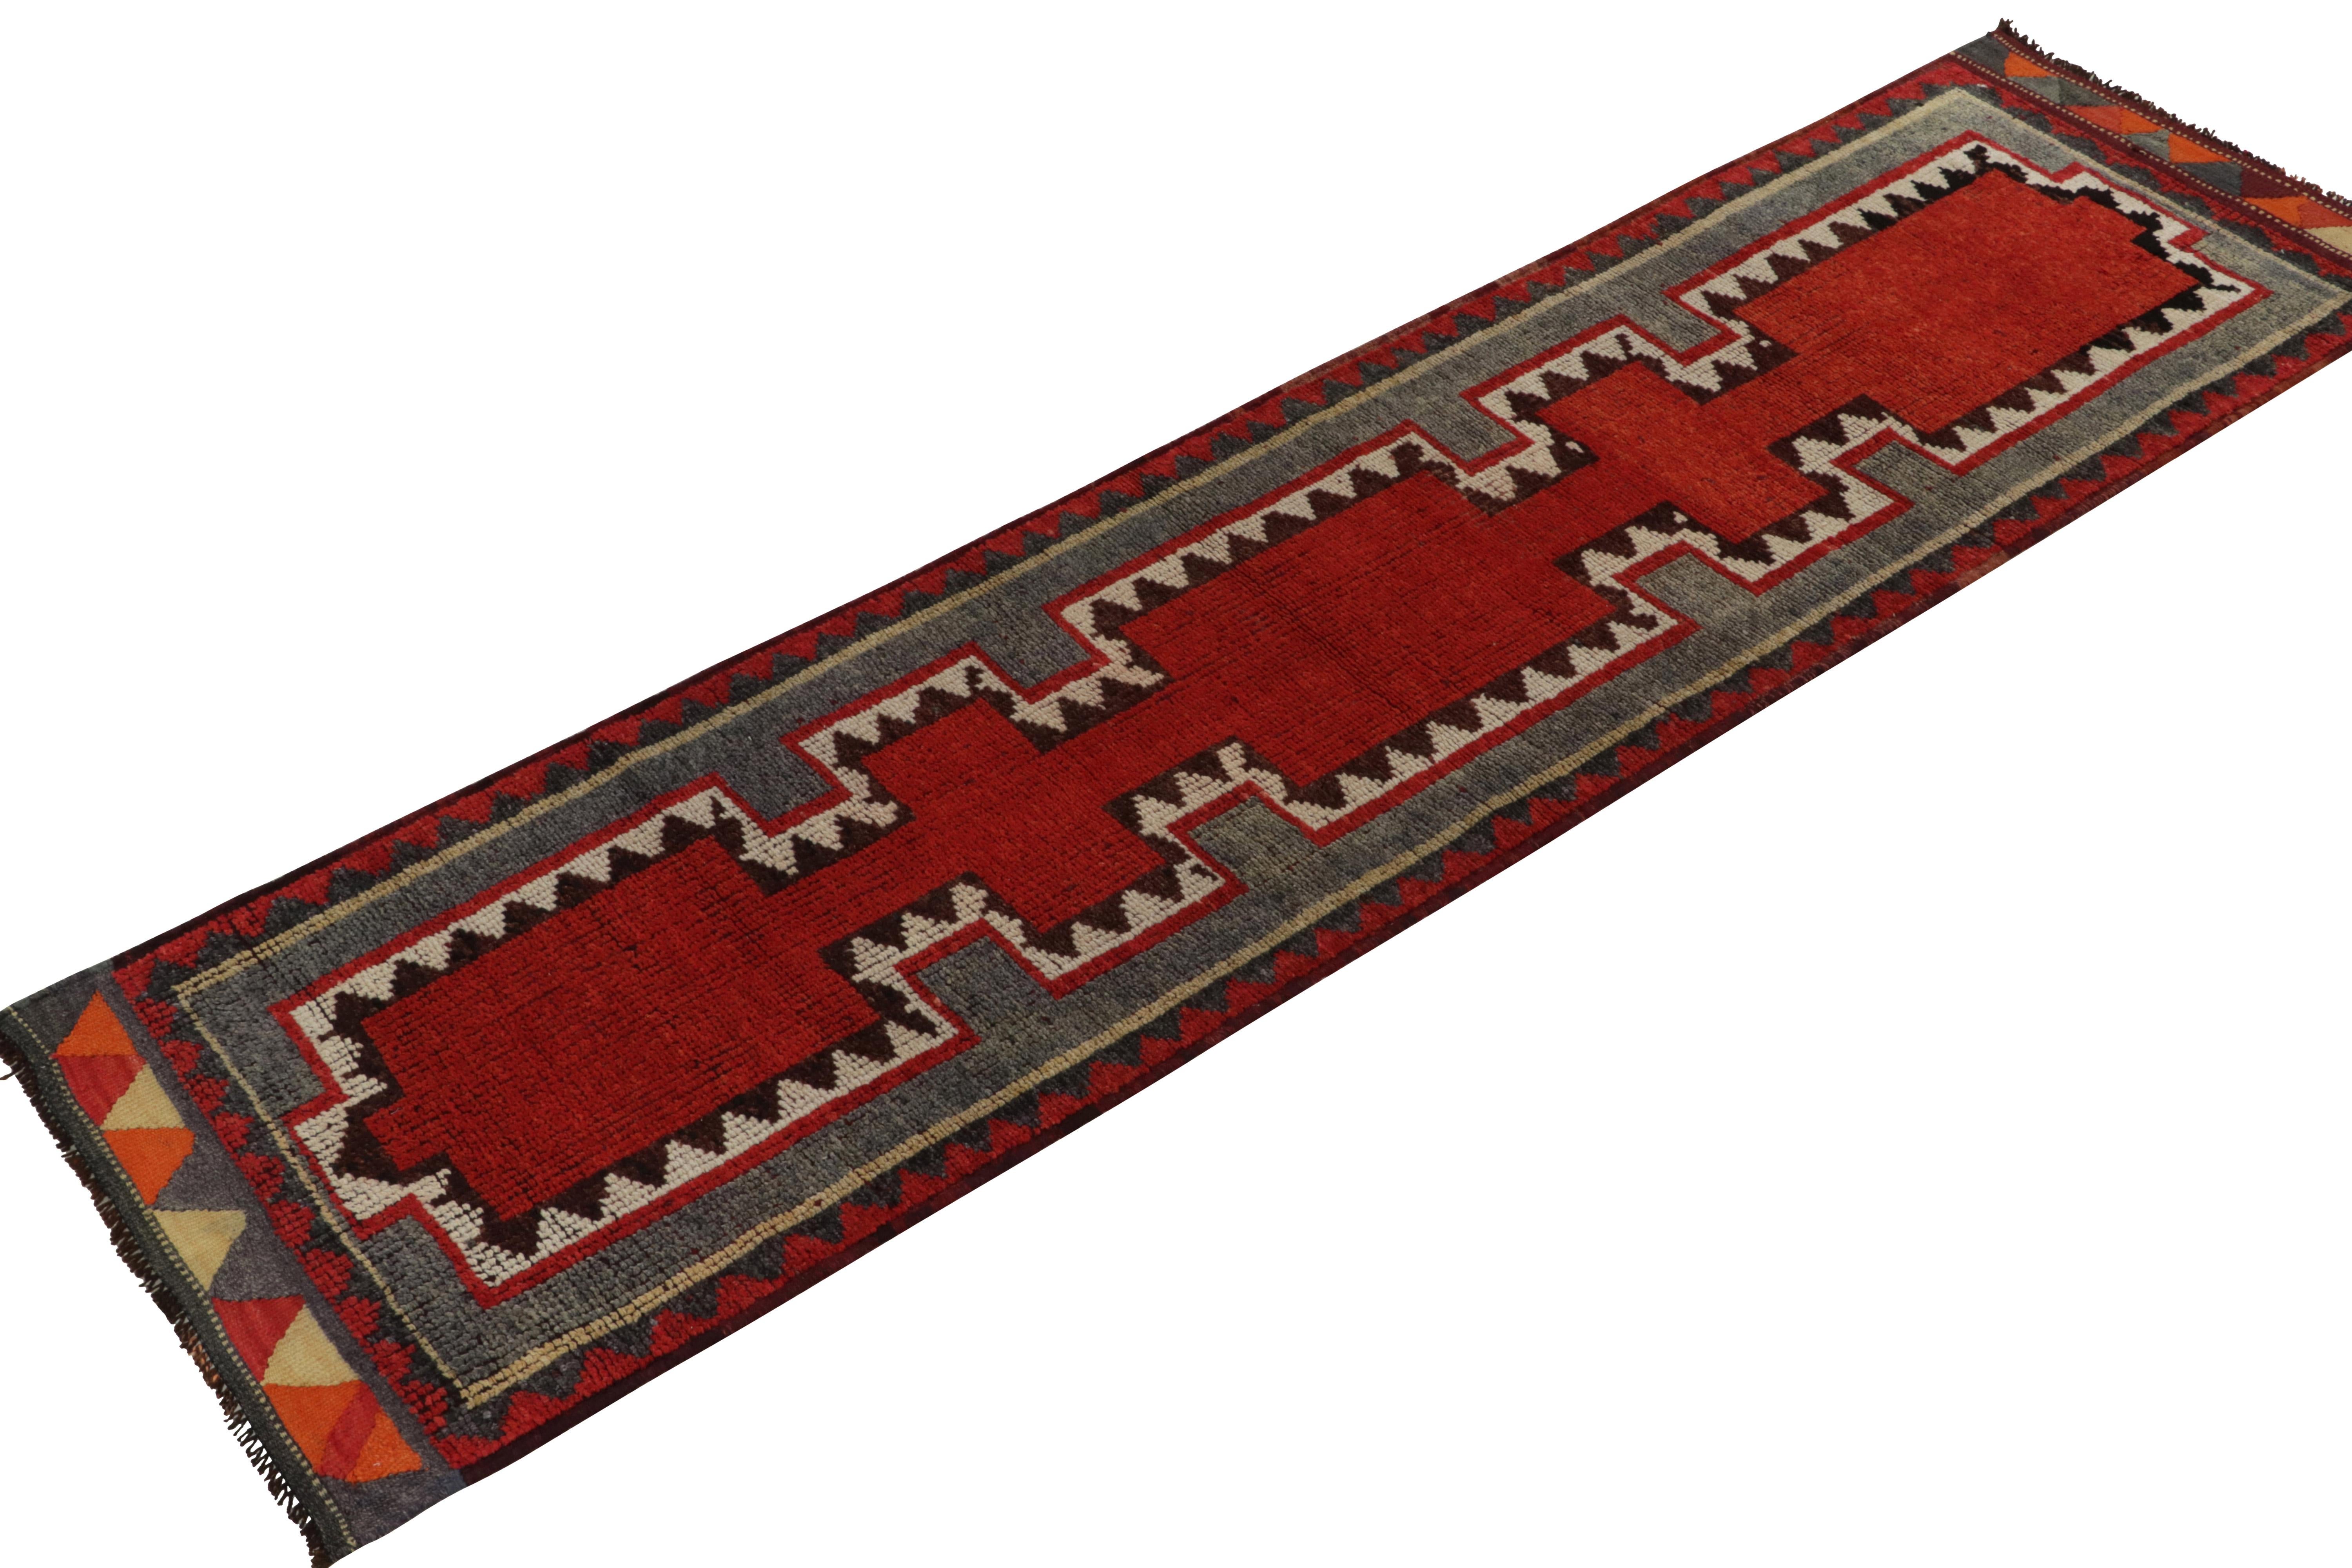 From Rug & Kilim Principal Josh Nazmiyal’s latest acquisitions, a distinct vintage runner originating from Turkey circa 1950-1960. The design enjoys a delicious, bright red open field smartly playing with blue and white geometric borders. Keen eyes